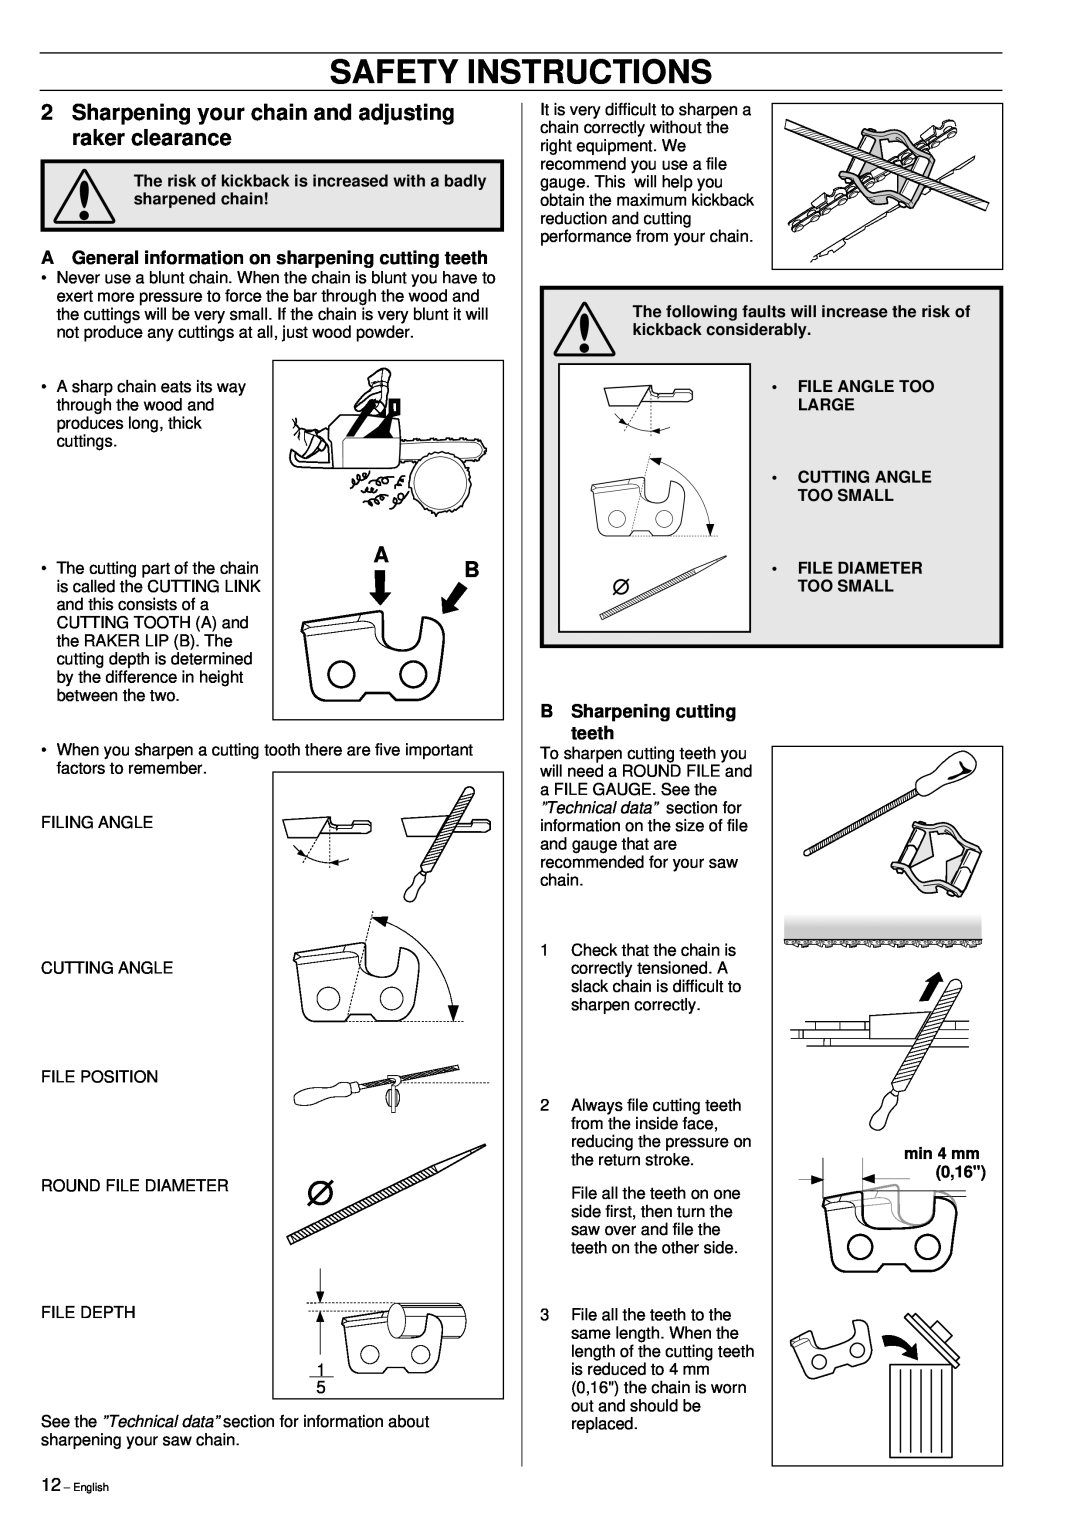 Jonsered 2149 manual AGeneral information on sharpening cutting teeth, B Sharpening cutting teeth, Safety Instructions 